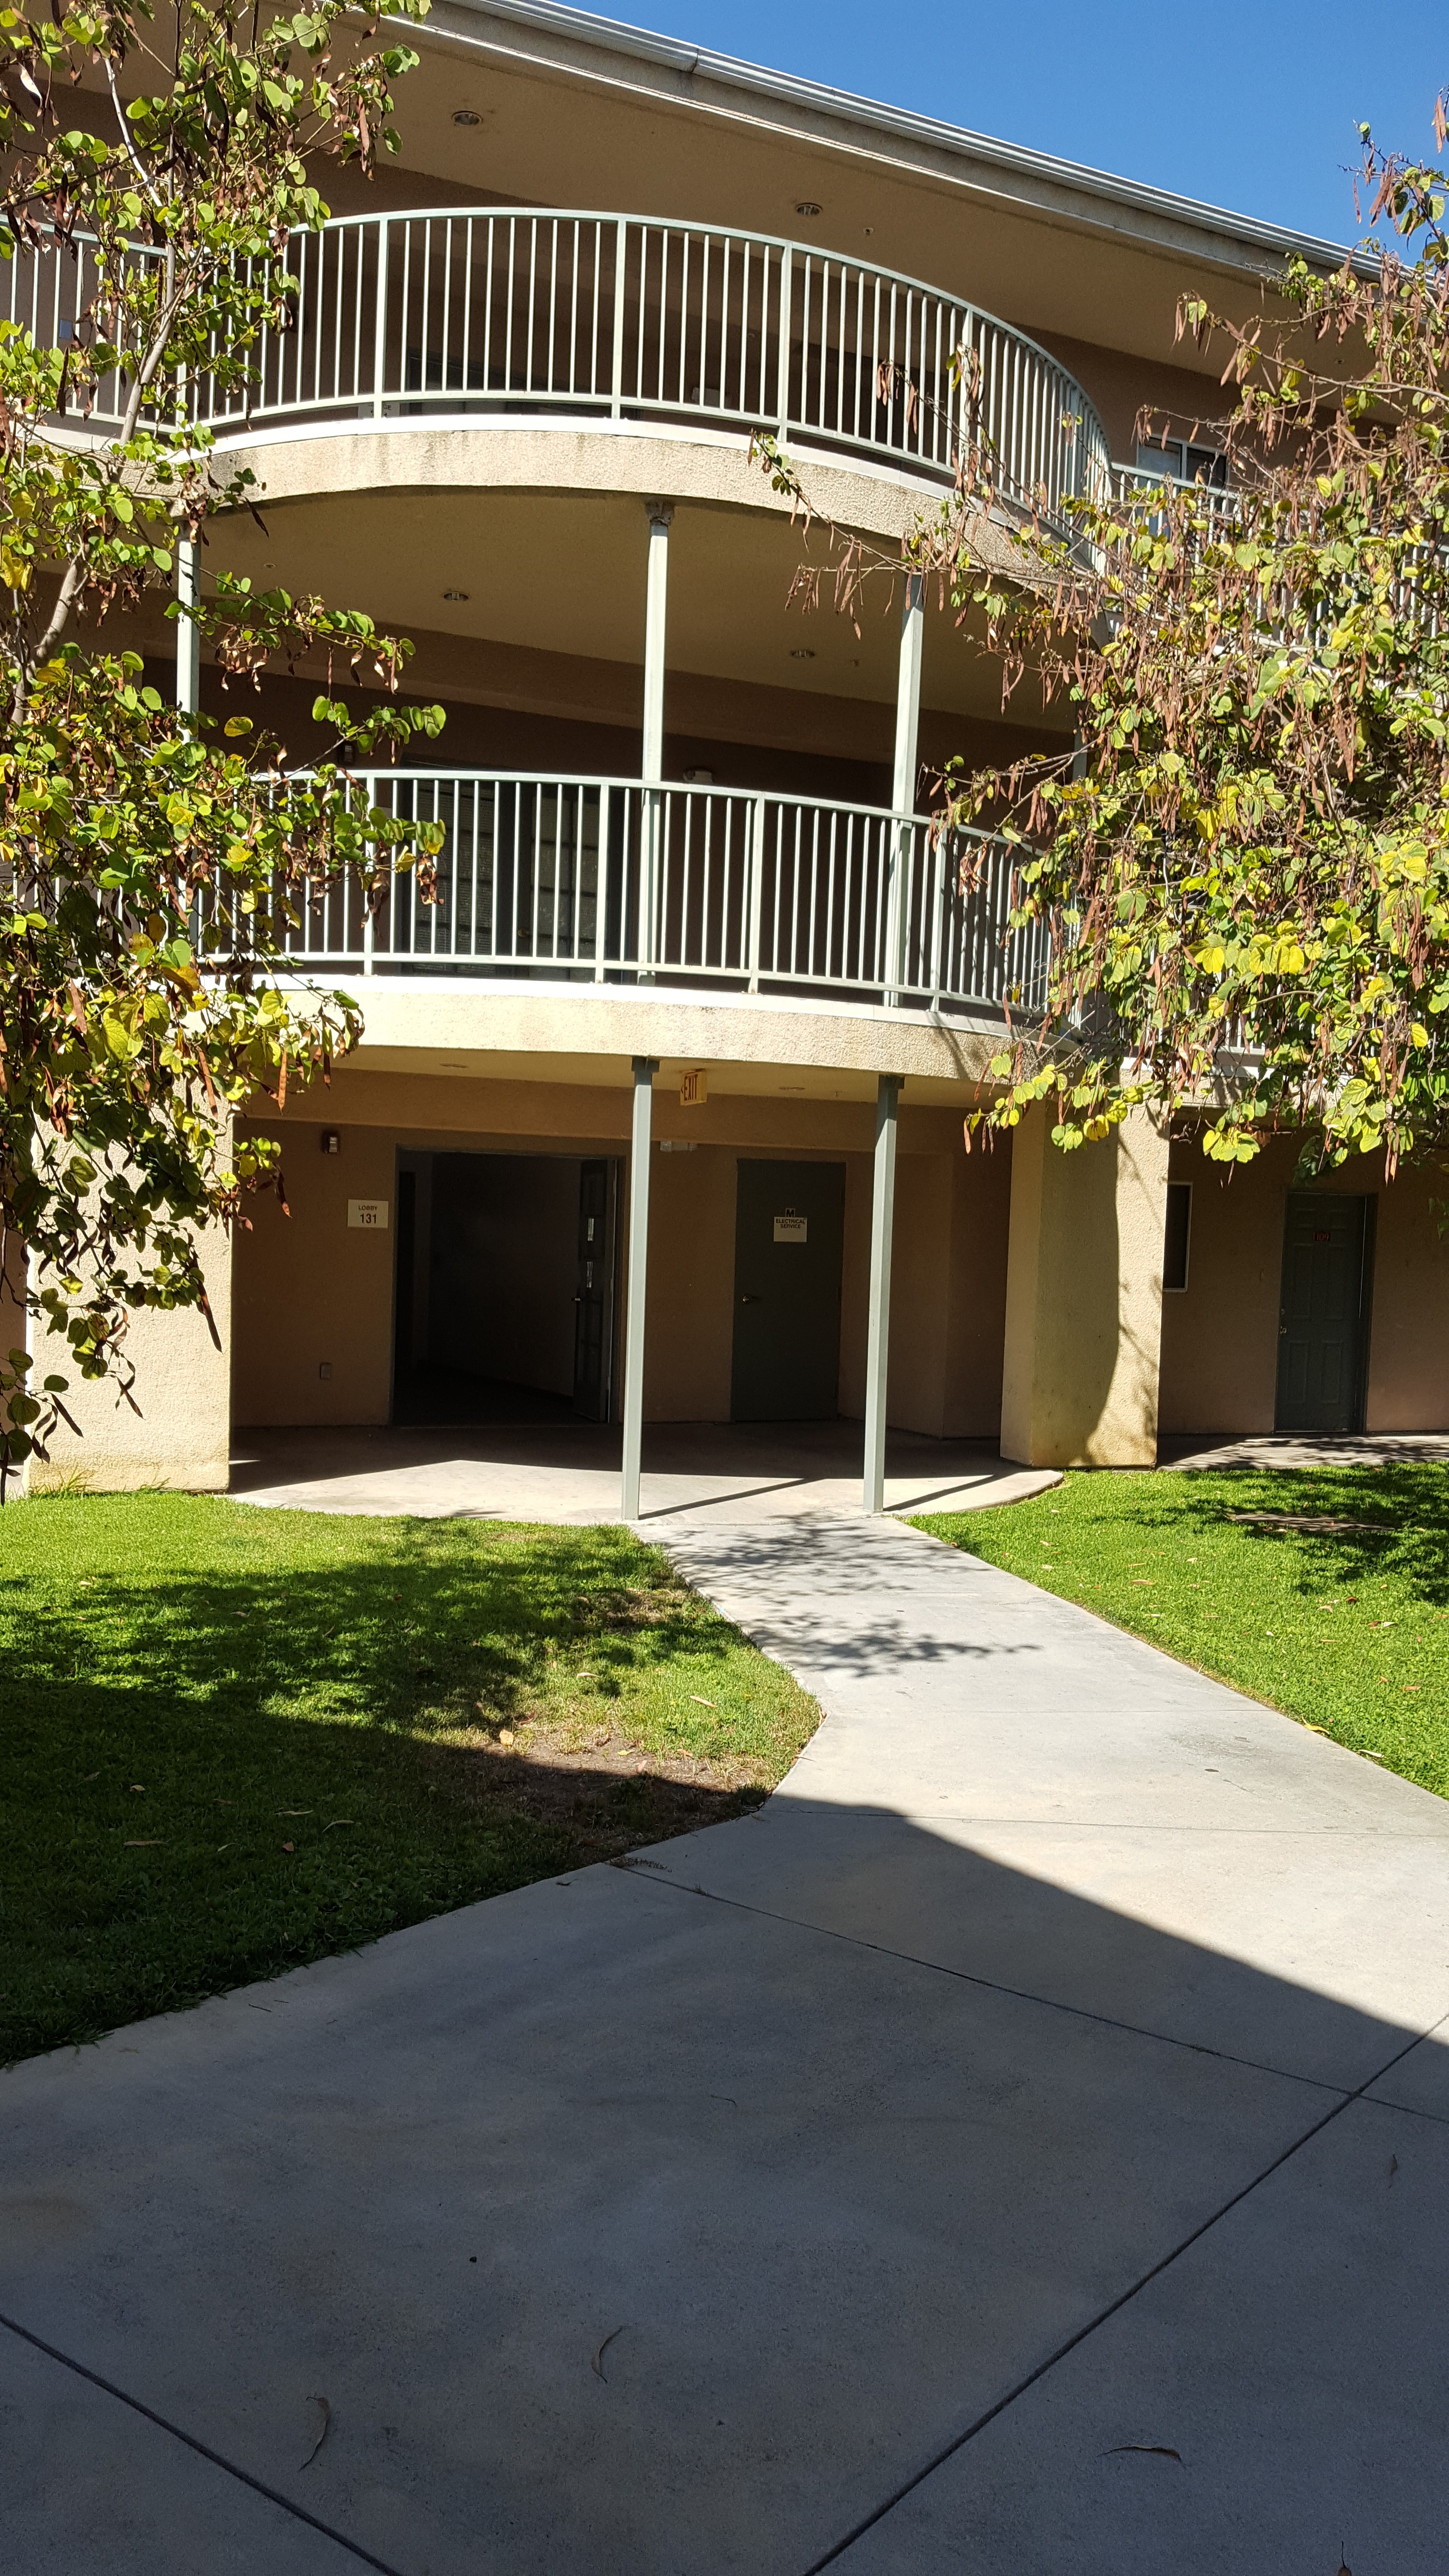 Front view of 3 floor building, grass and trees along sidewalk entry way